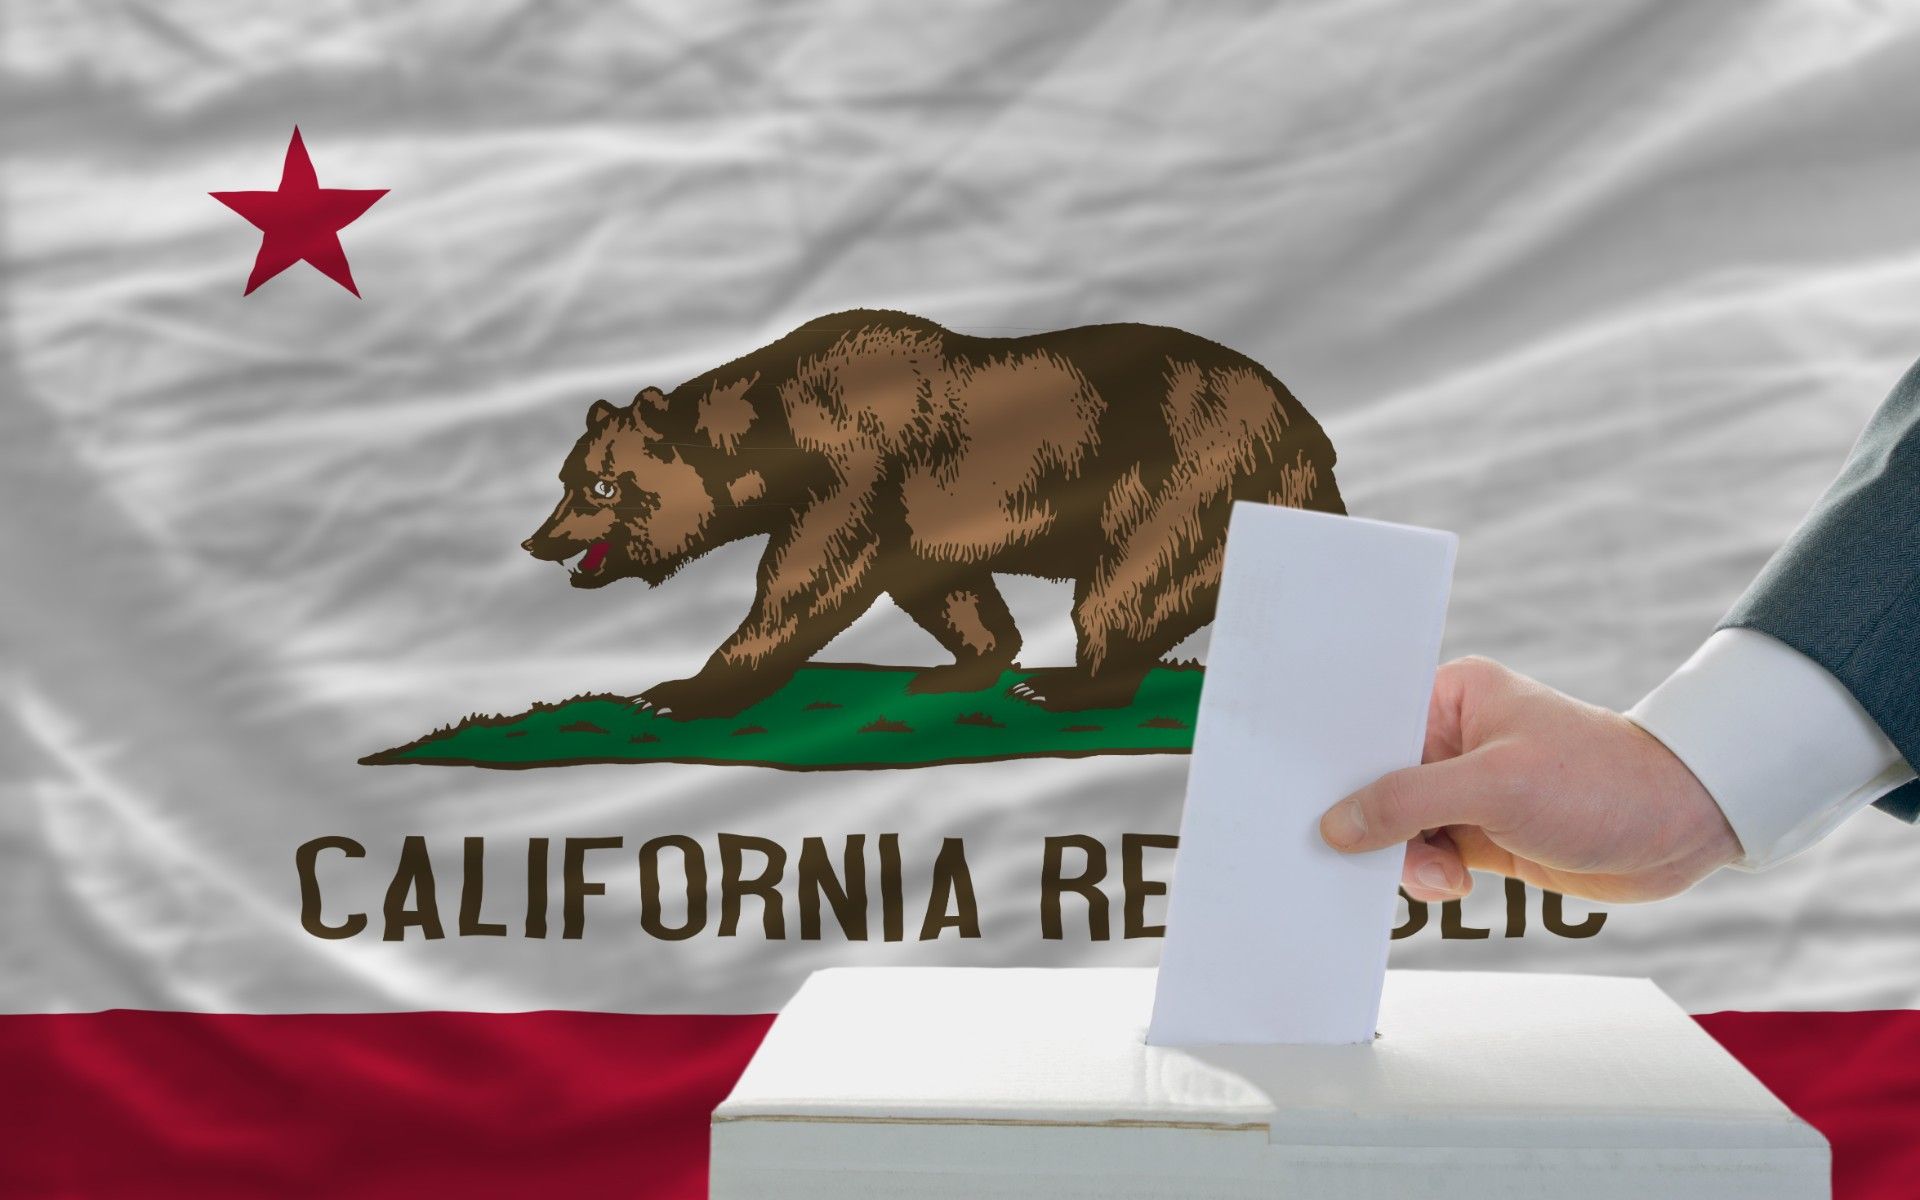 A man's hand puts a paper in a ballot box in front of a California flag - ballot initiatives